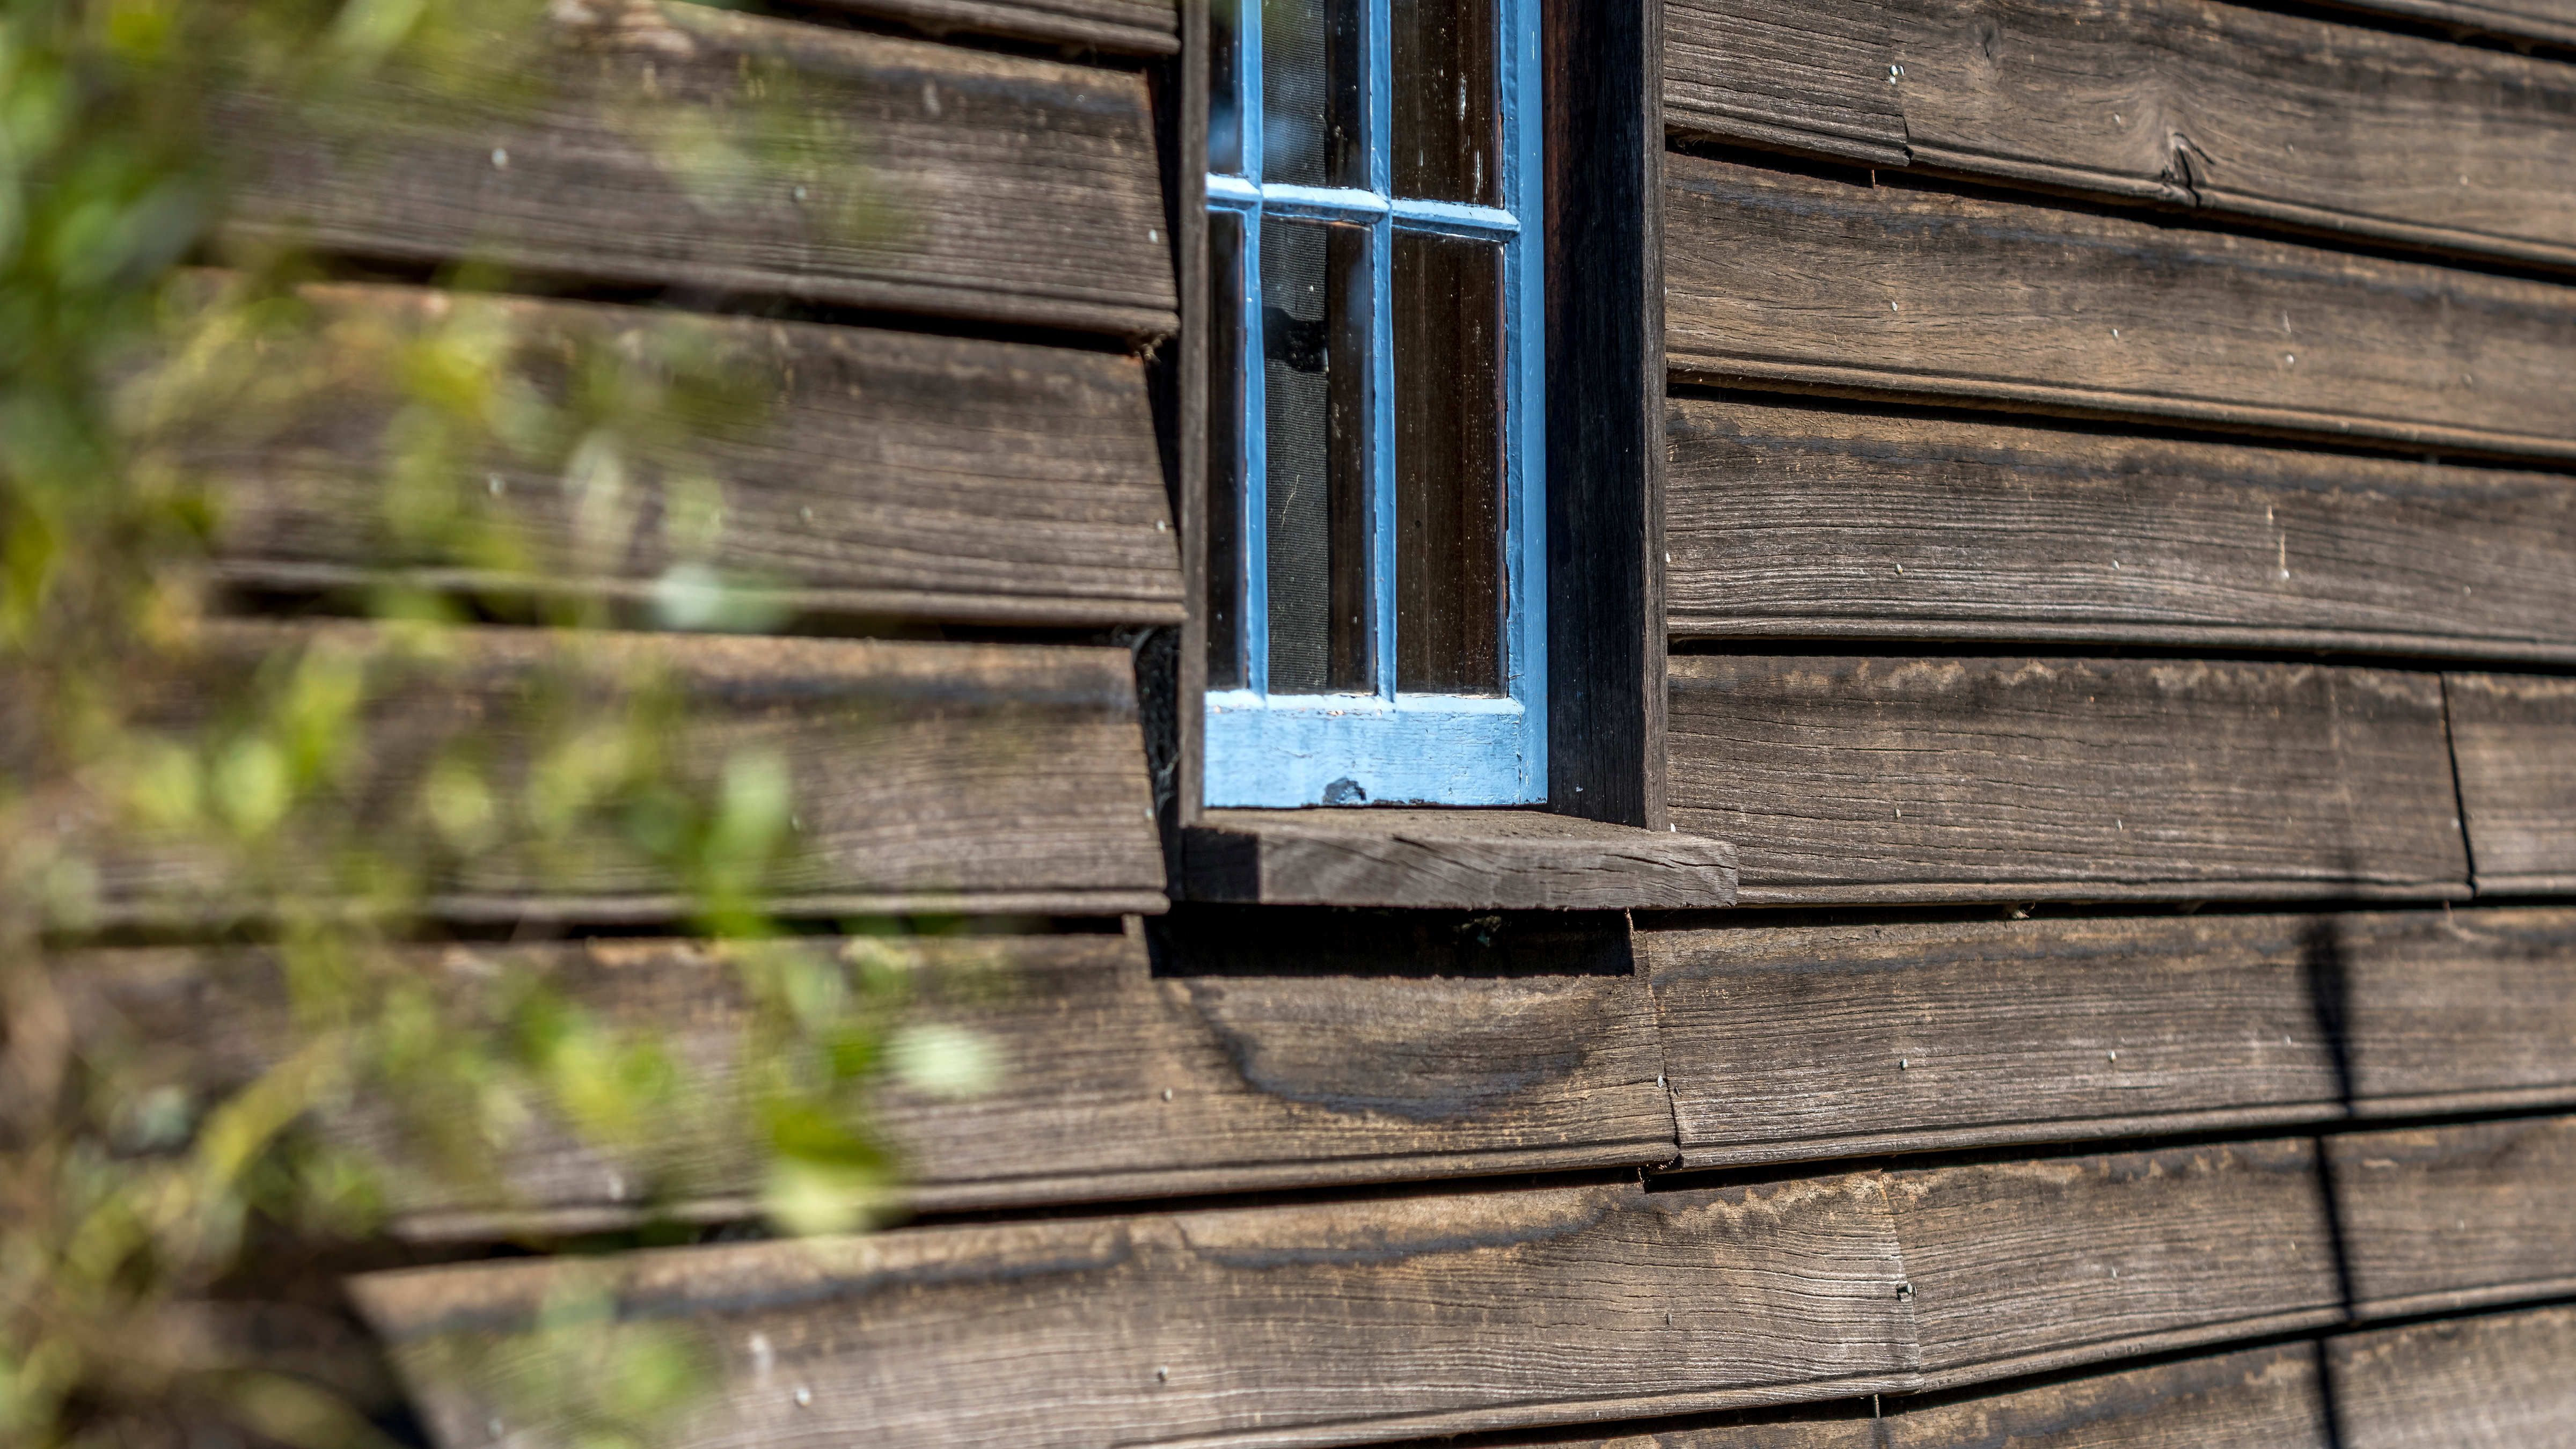 The exterior wall of a cottage consisting of horizontal timber weatherboards. There is a six paned blue window set into the wall and out of focus foliage in the foreground. Photo: Rob Burnett.